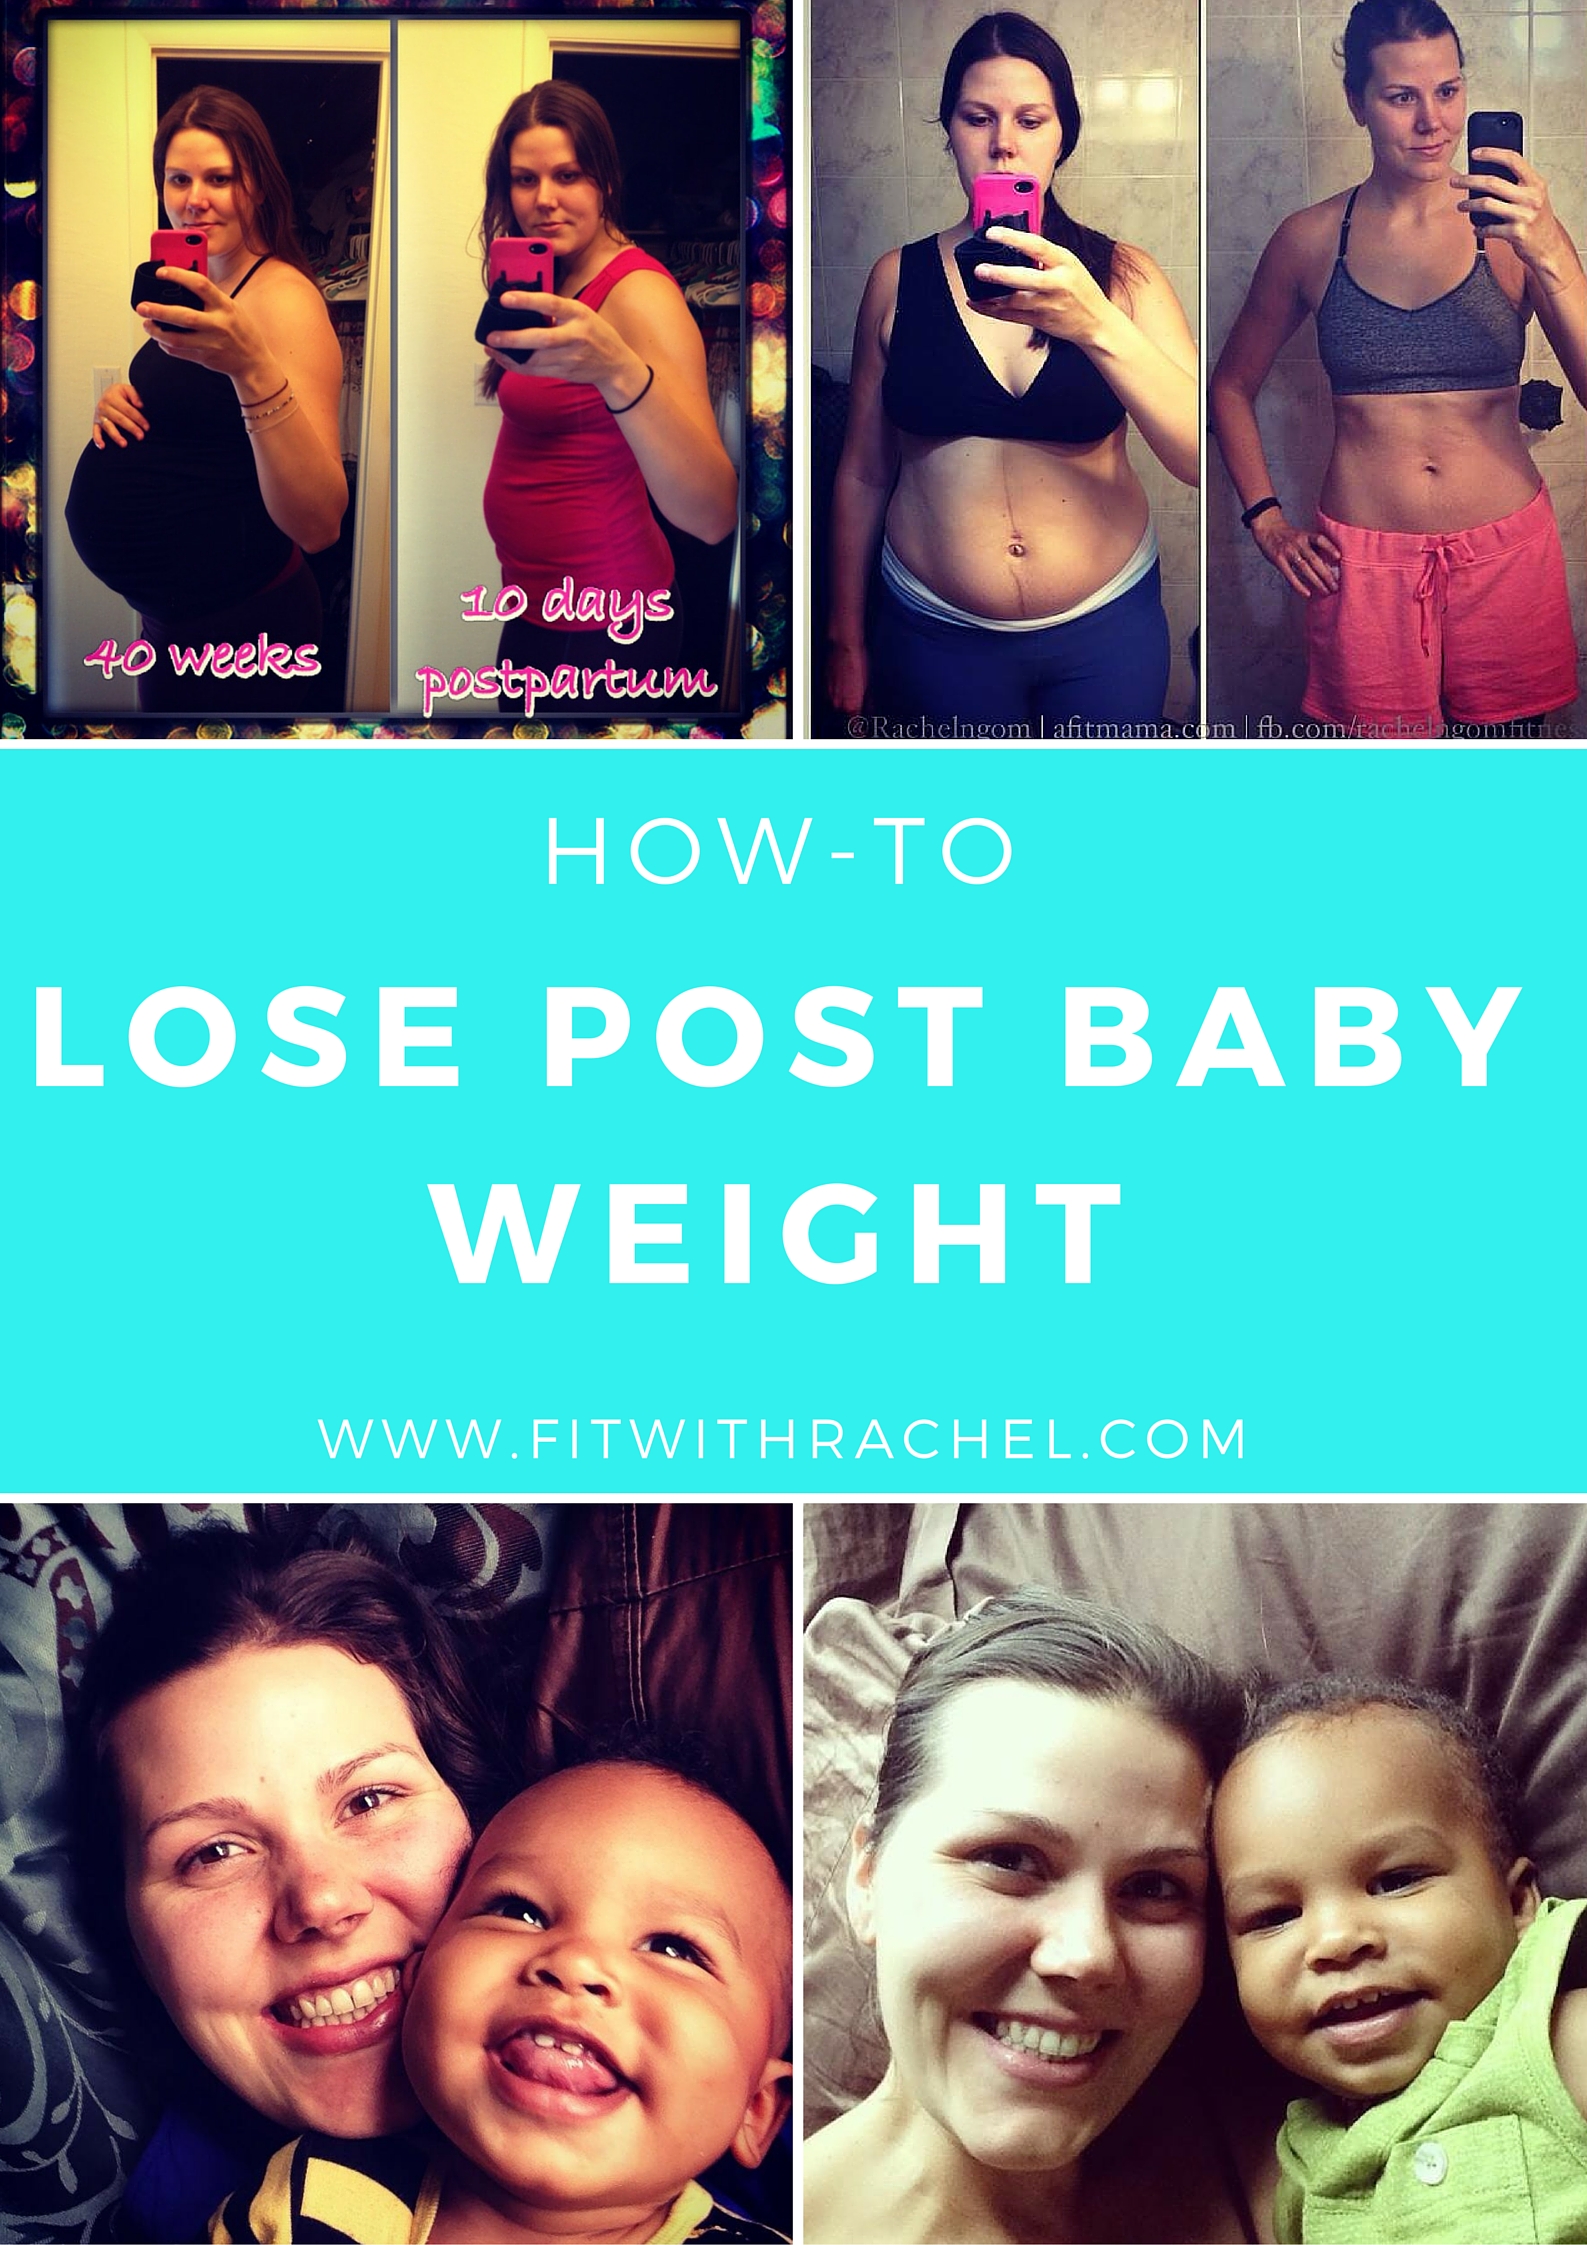 How To Lose Post Baby Weight - Fit with Rachel